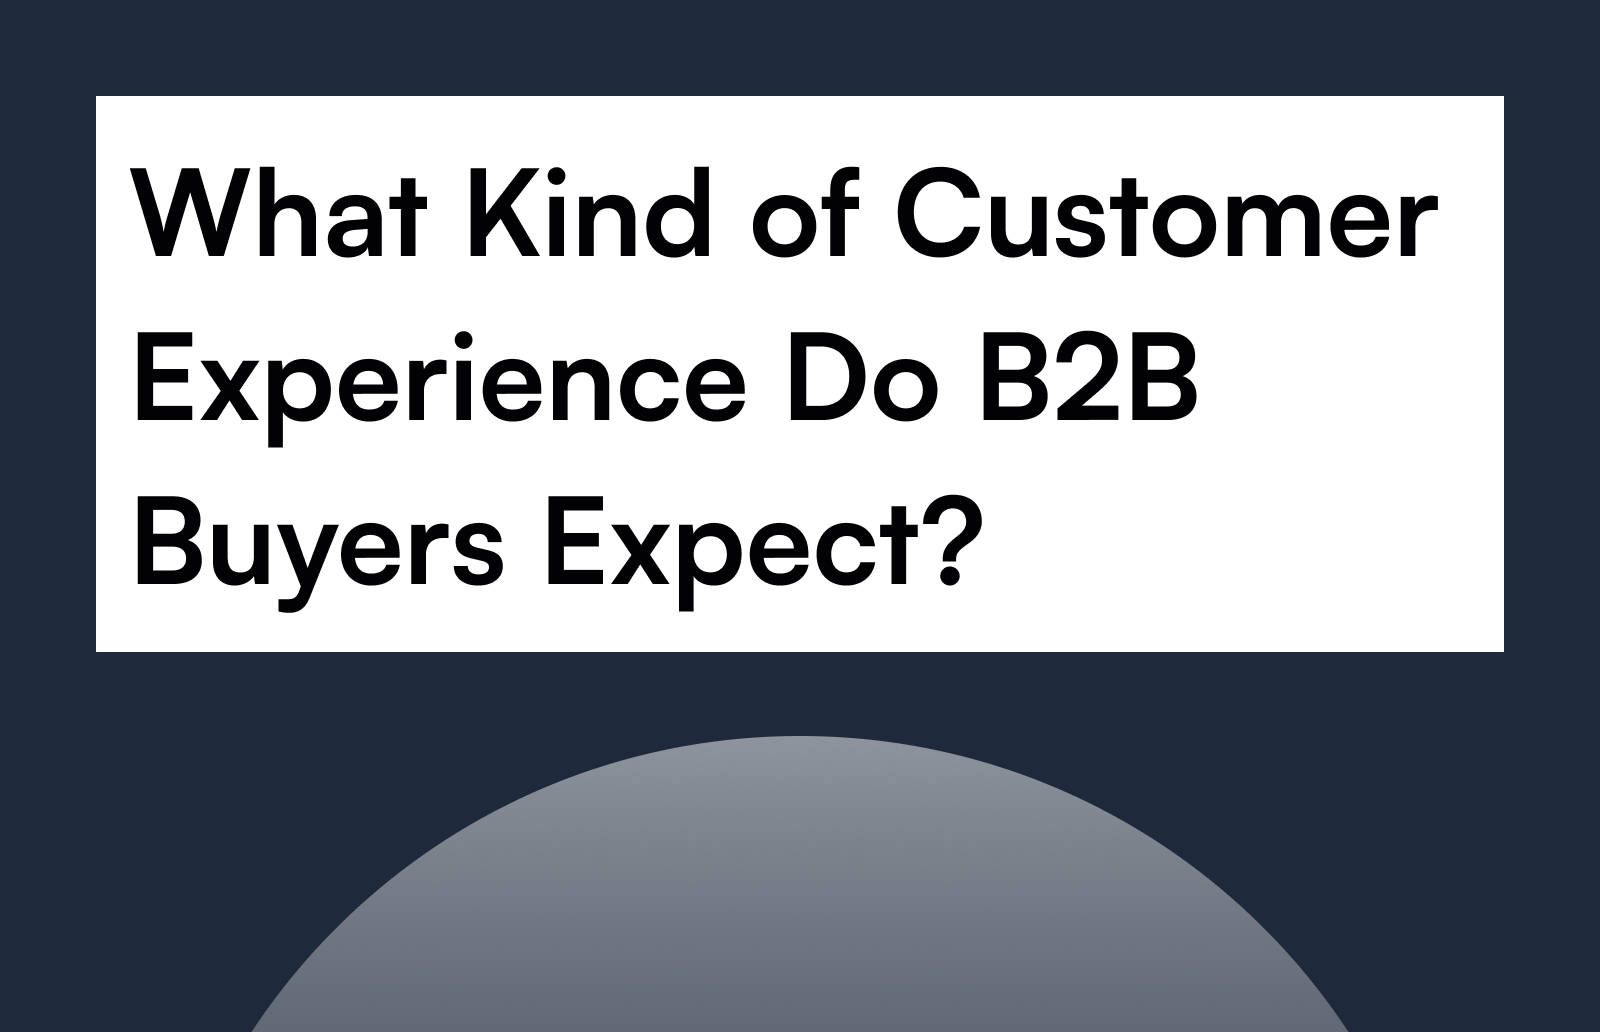 What Kind of Customer Experience Do B2B Buyers Expect?